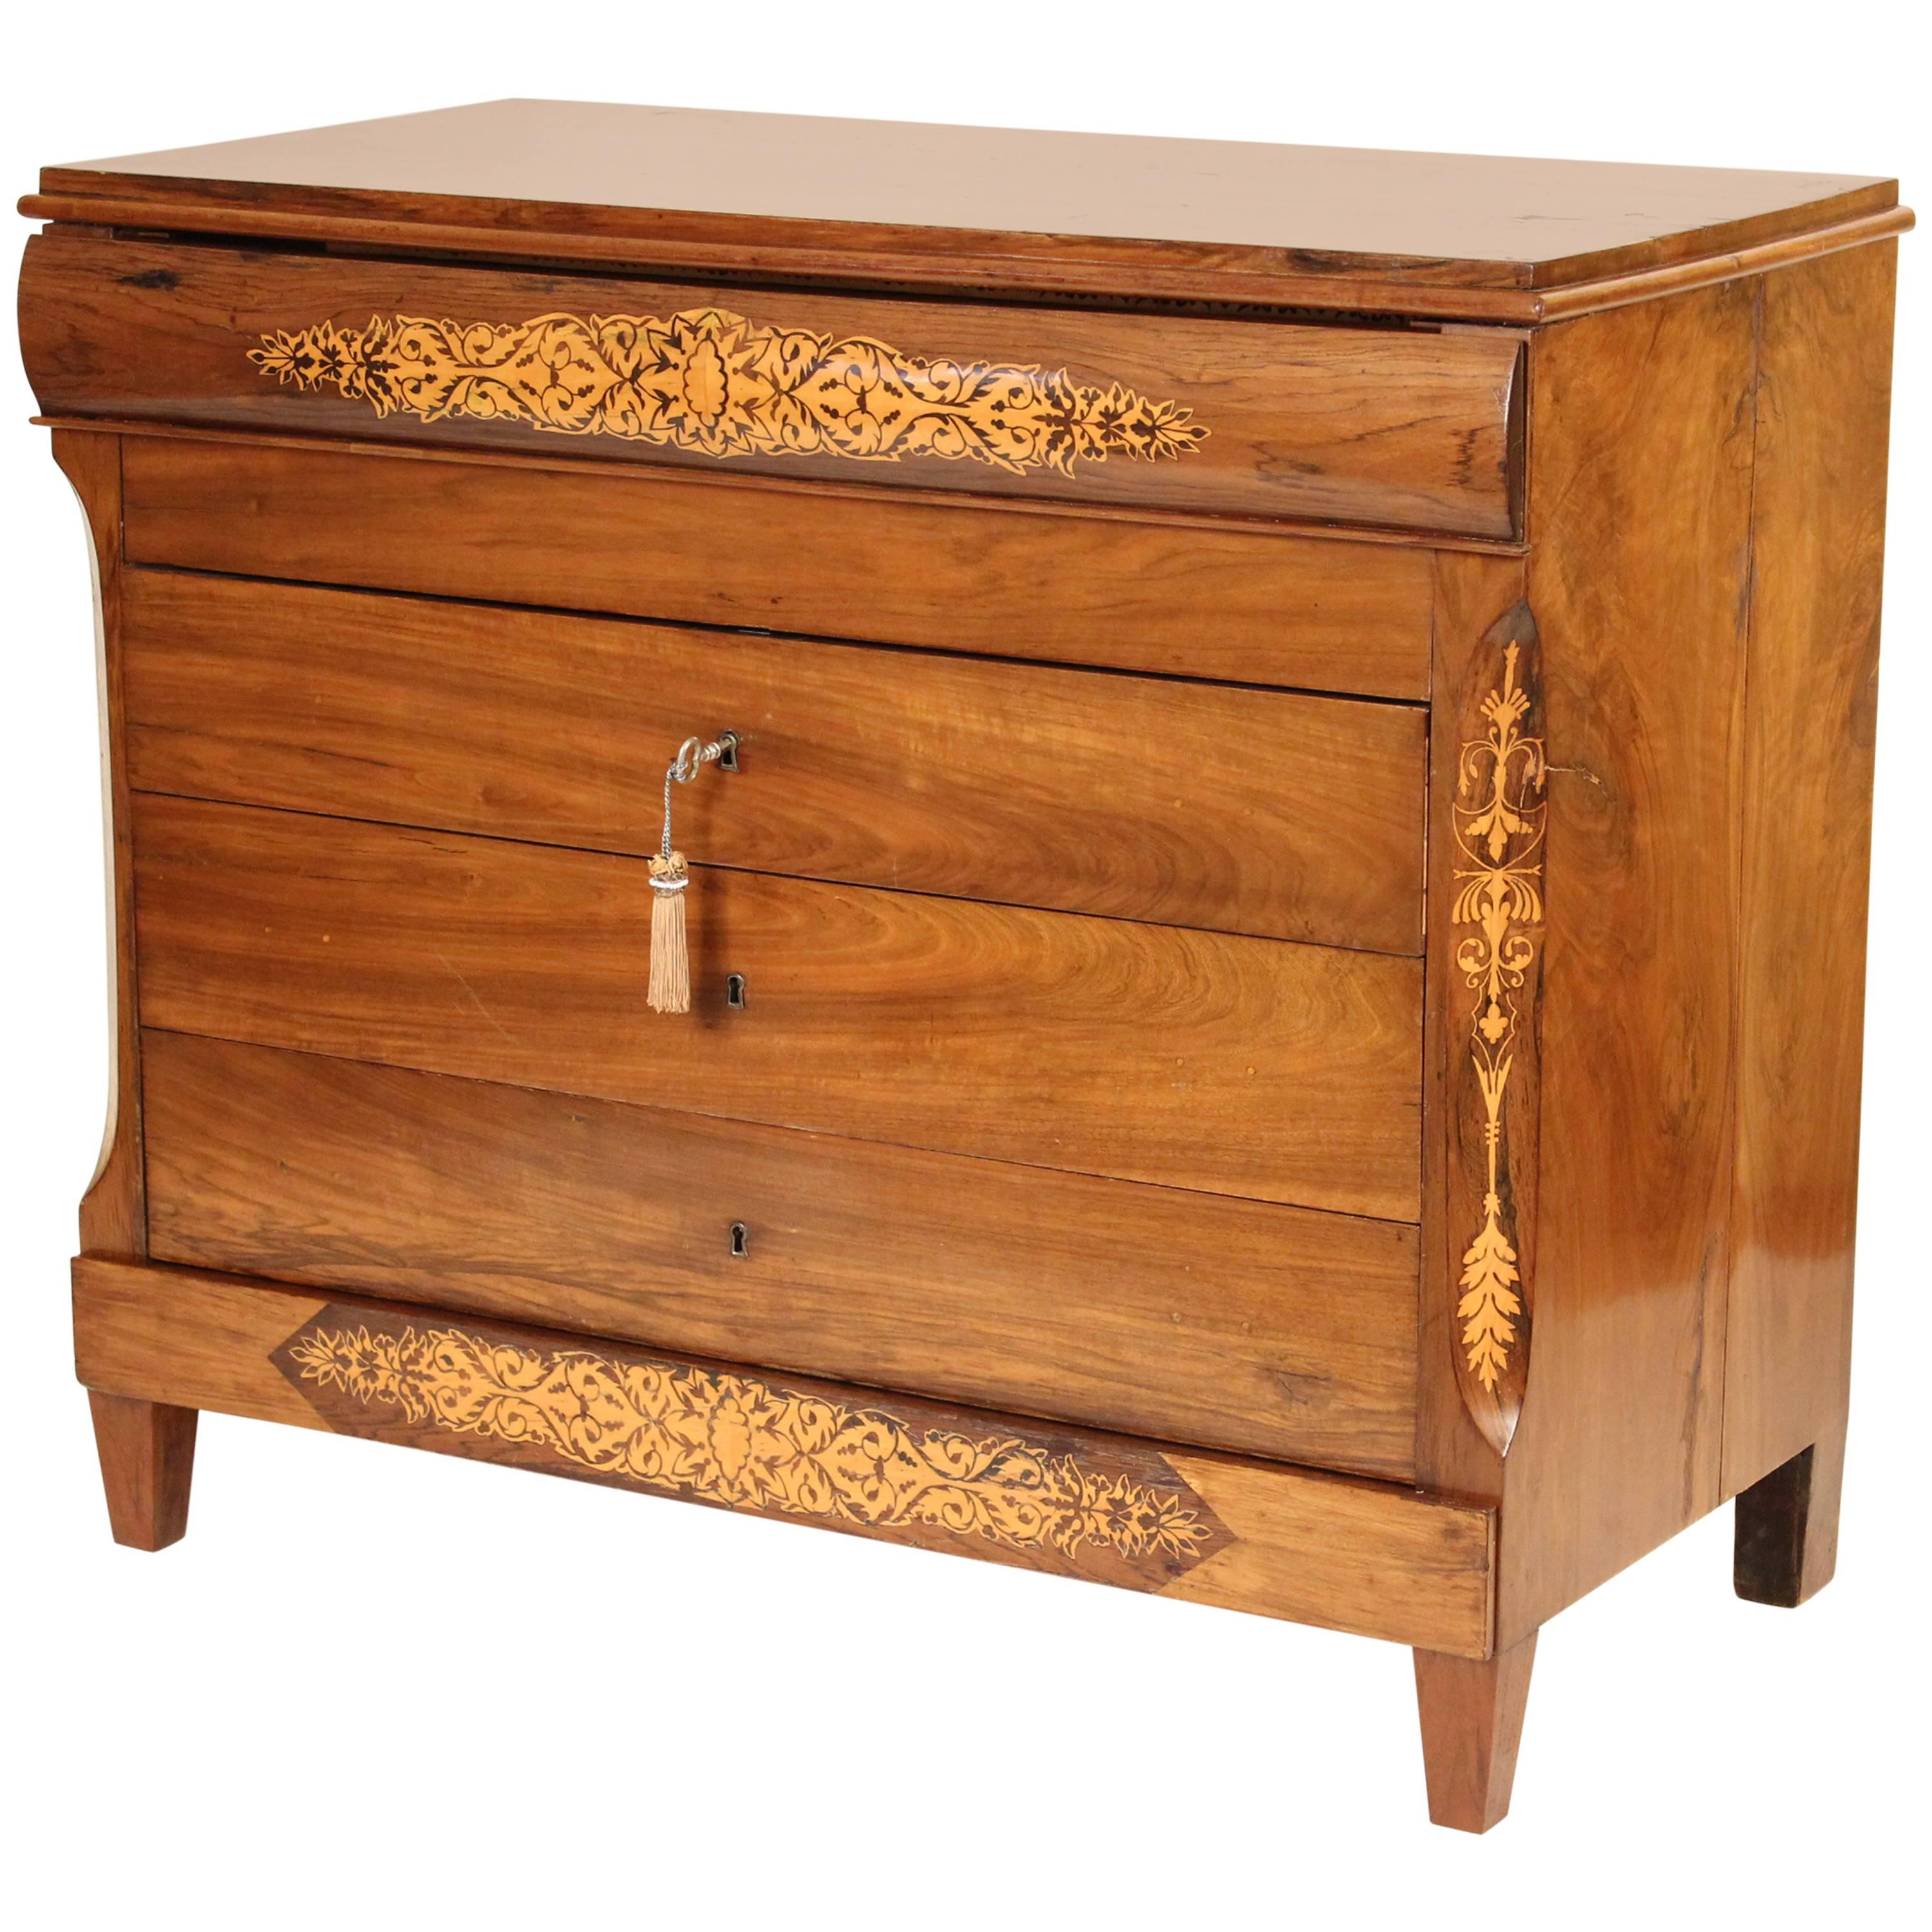 Neoclassical Chest of Drawers/Desk